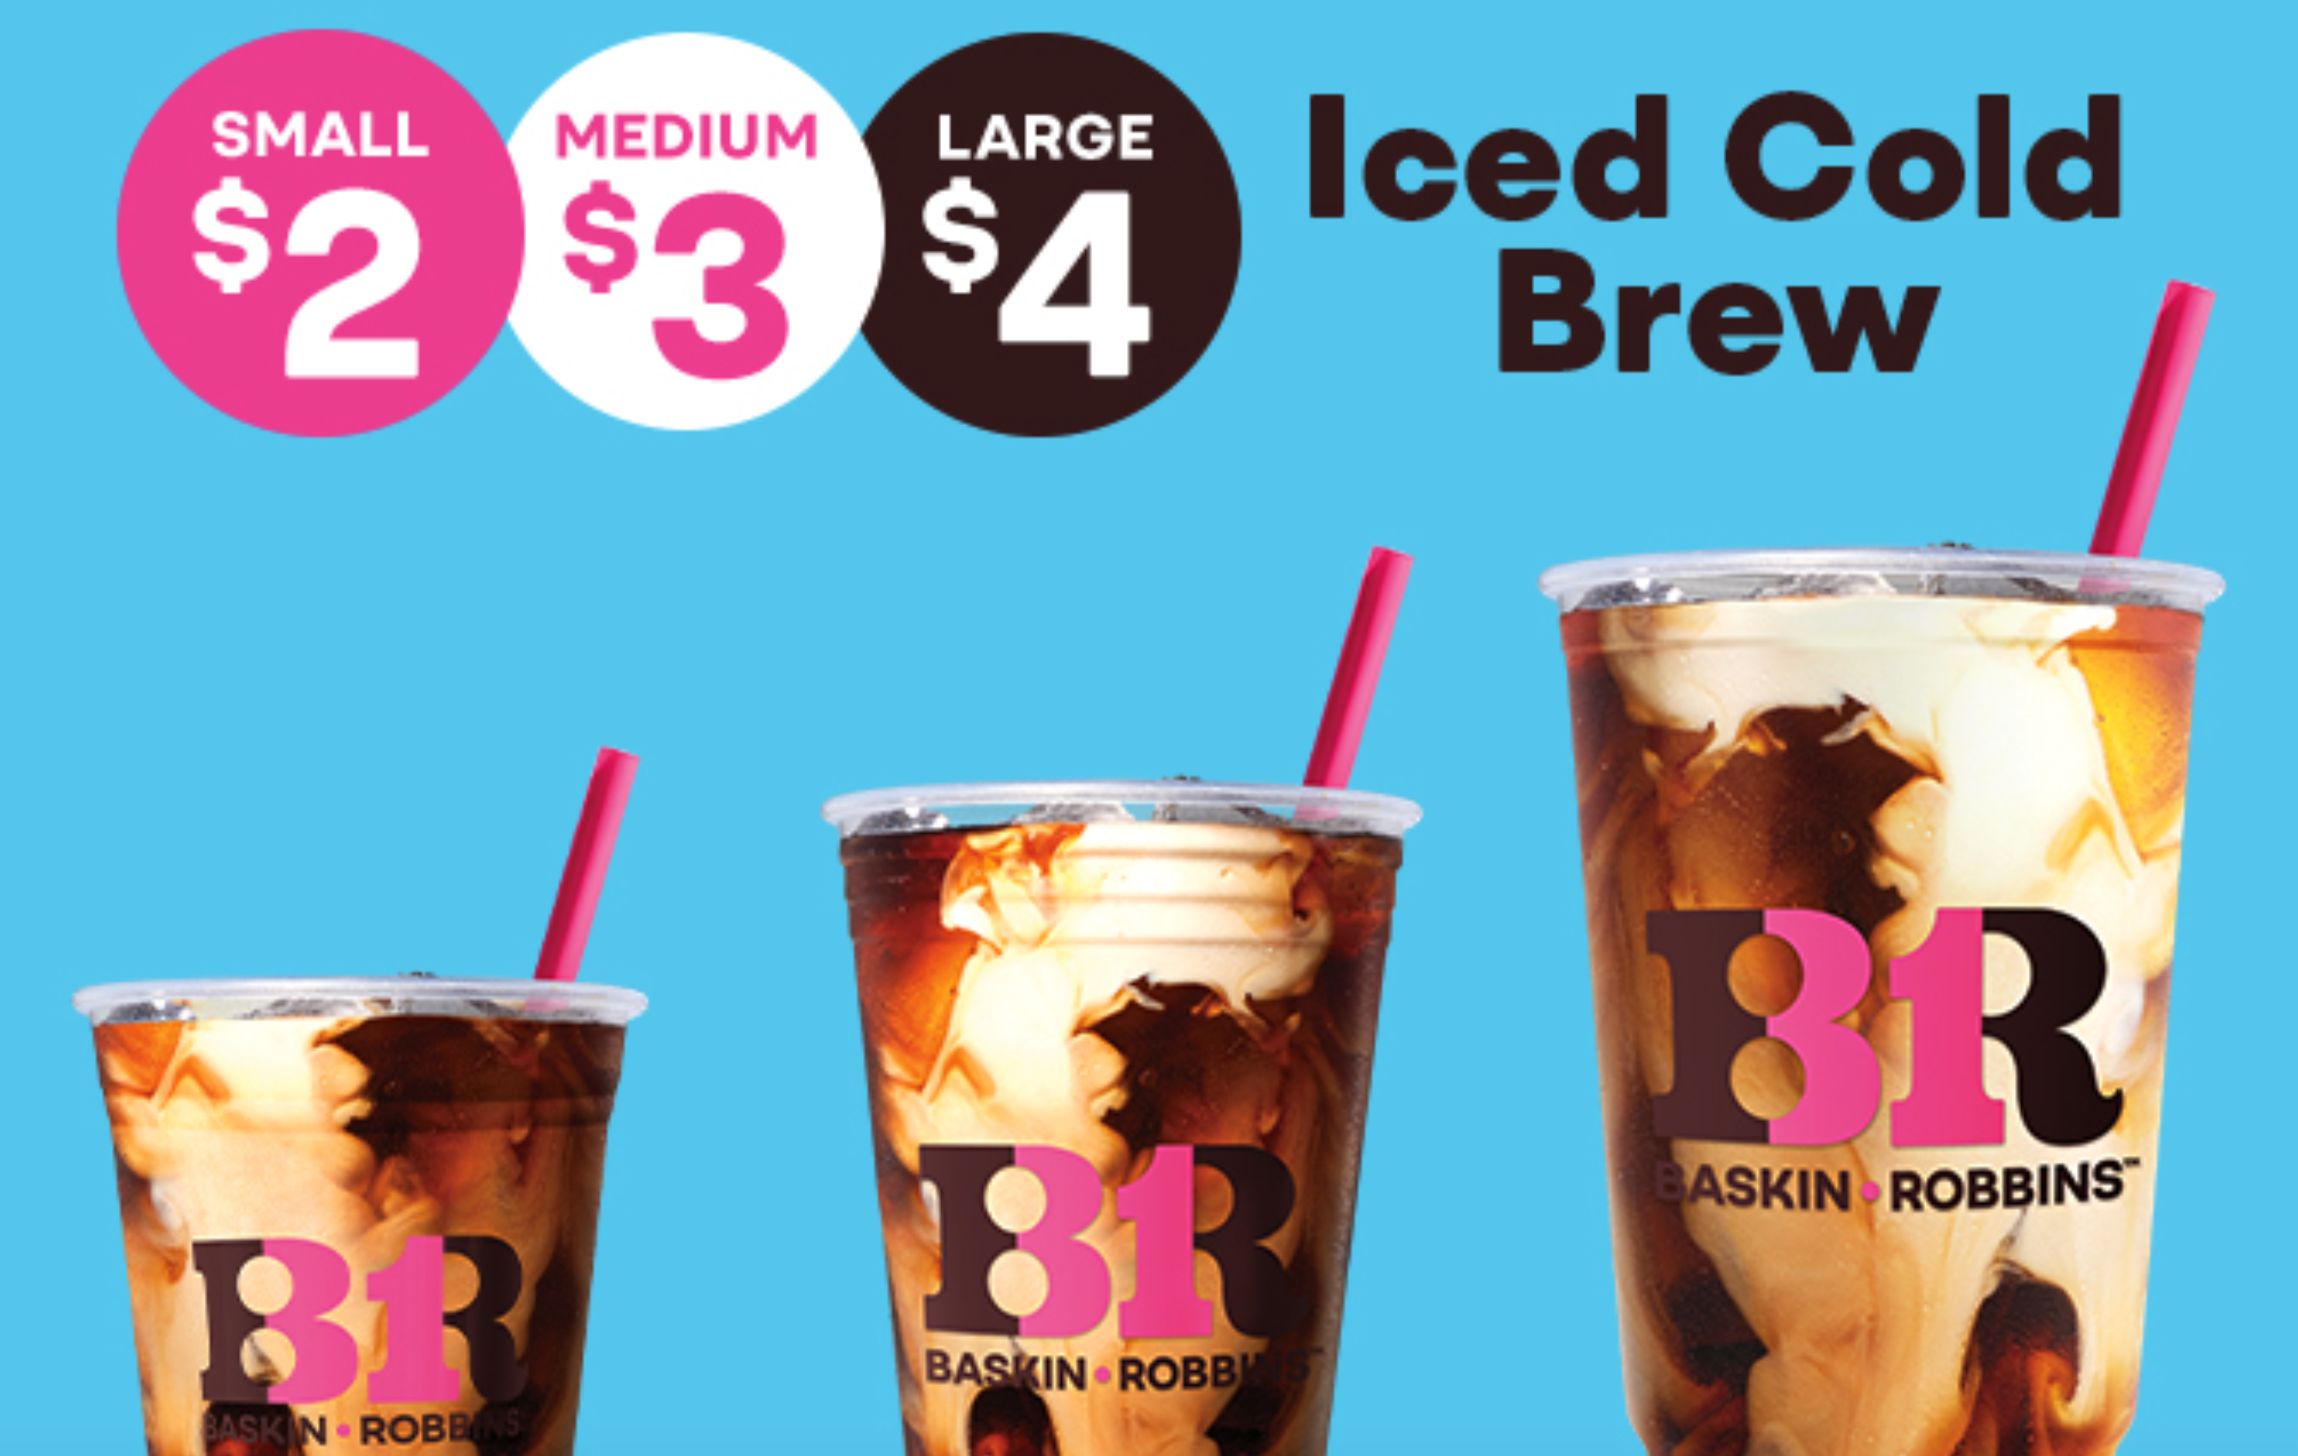 Baskin-Robbins is Selling their Iced Cold Brew Coffees for $2, $3 and $4 In-shop Through to September 4